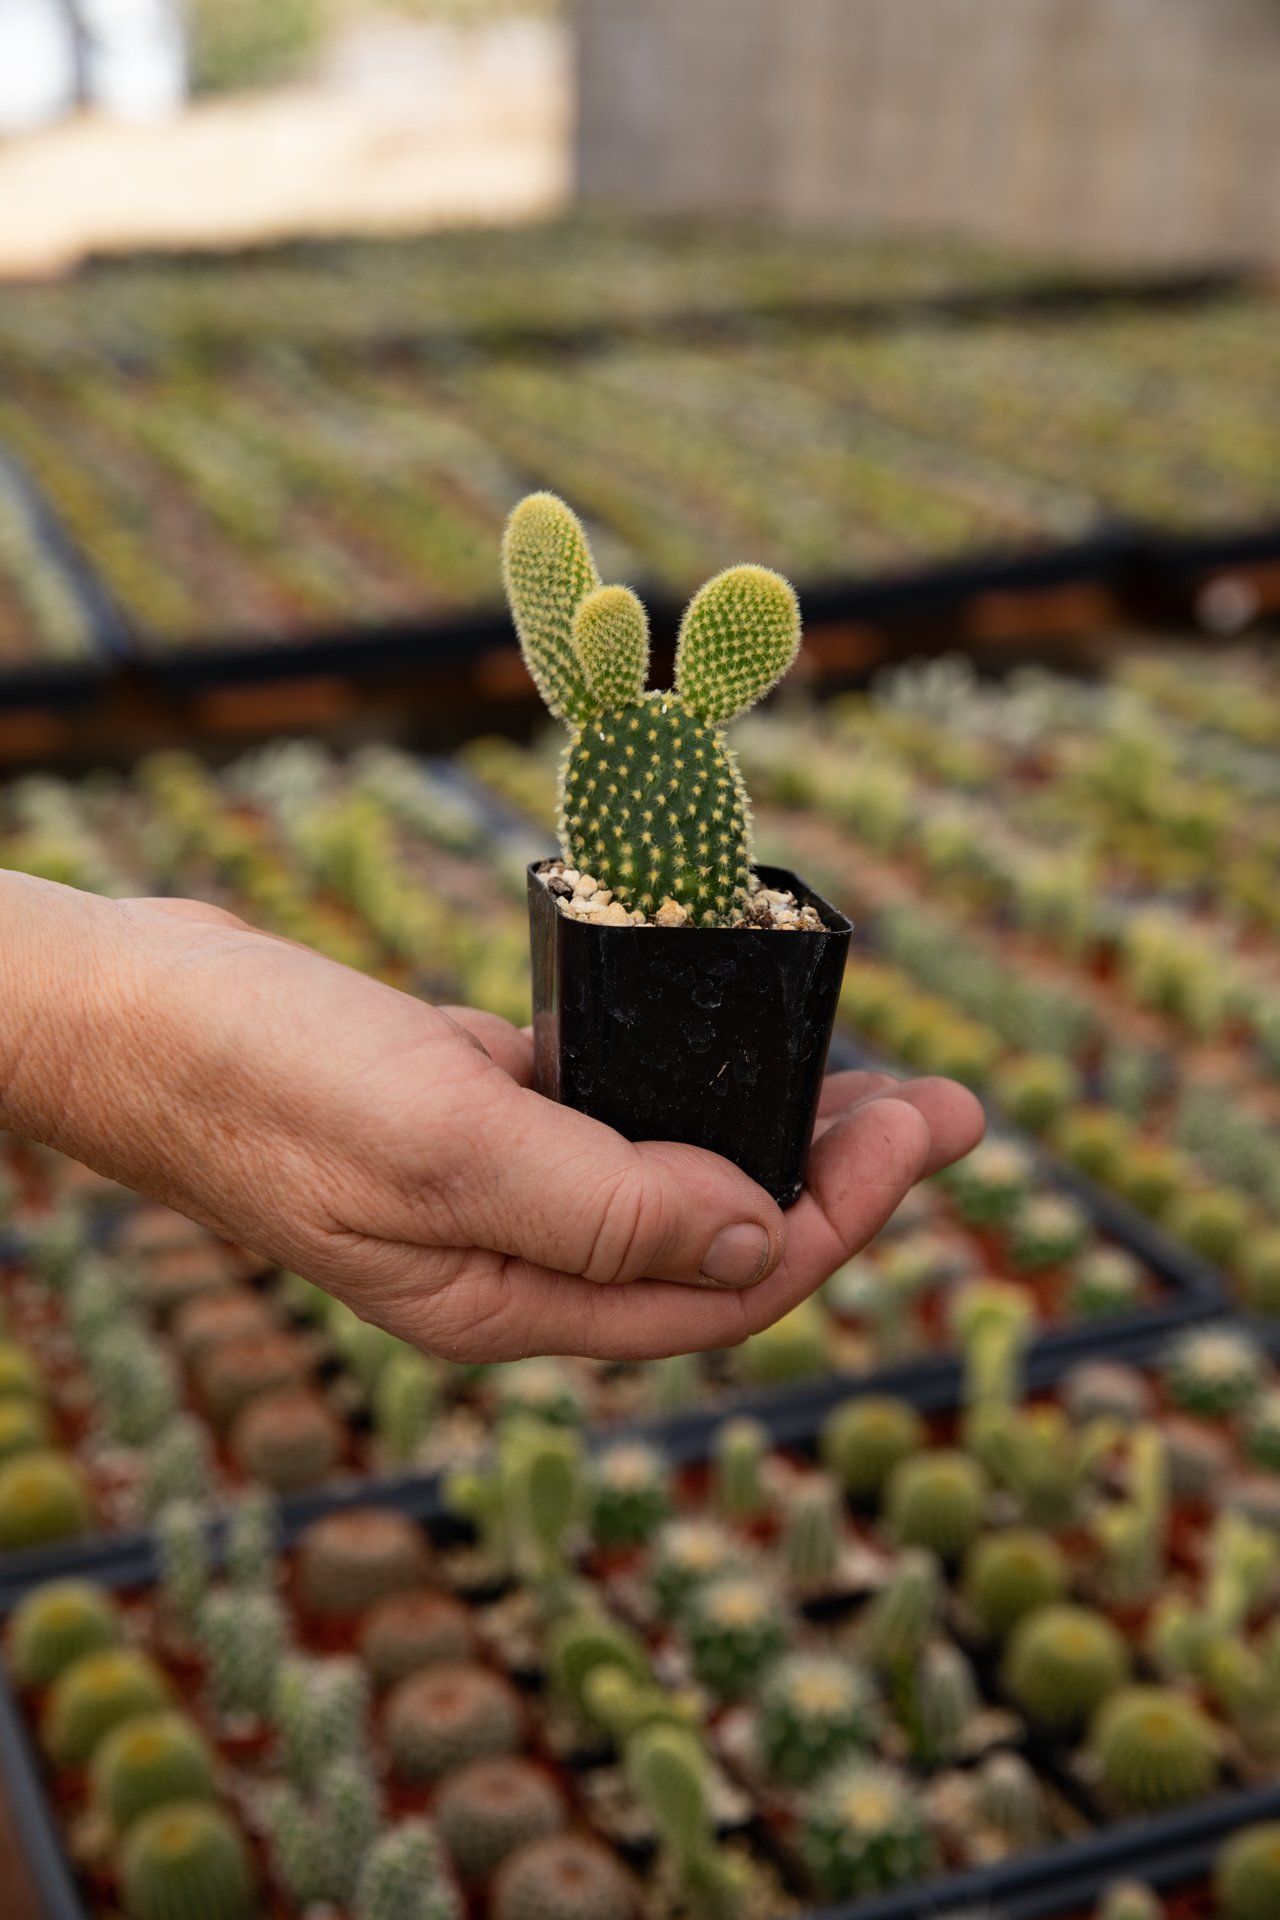 A person is holding a small cactus in their hand in a greenhouse.